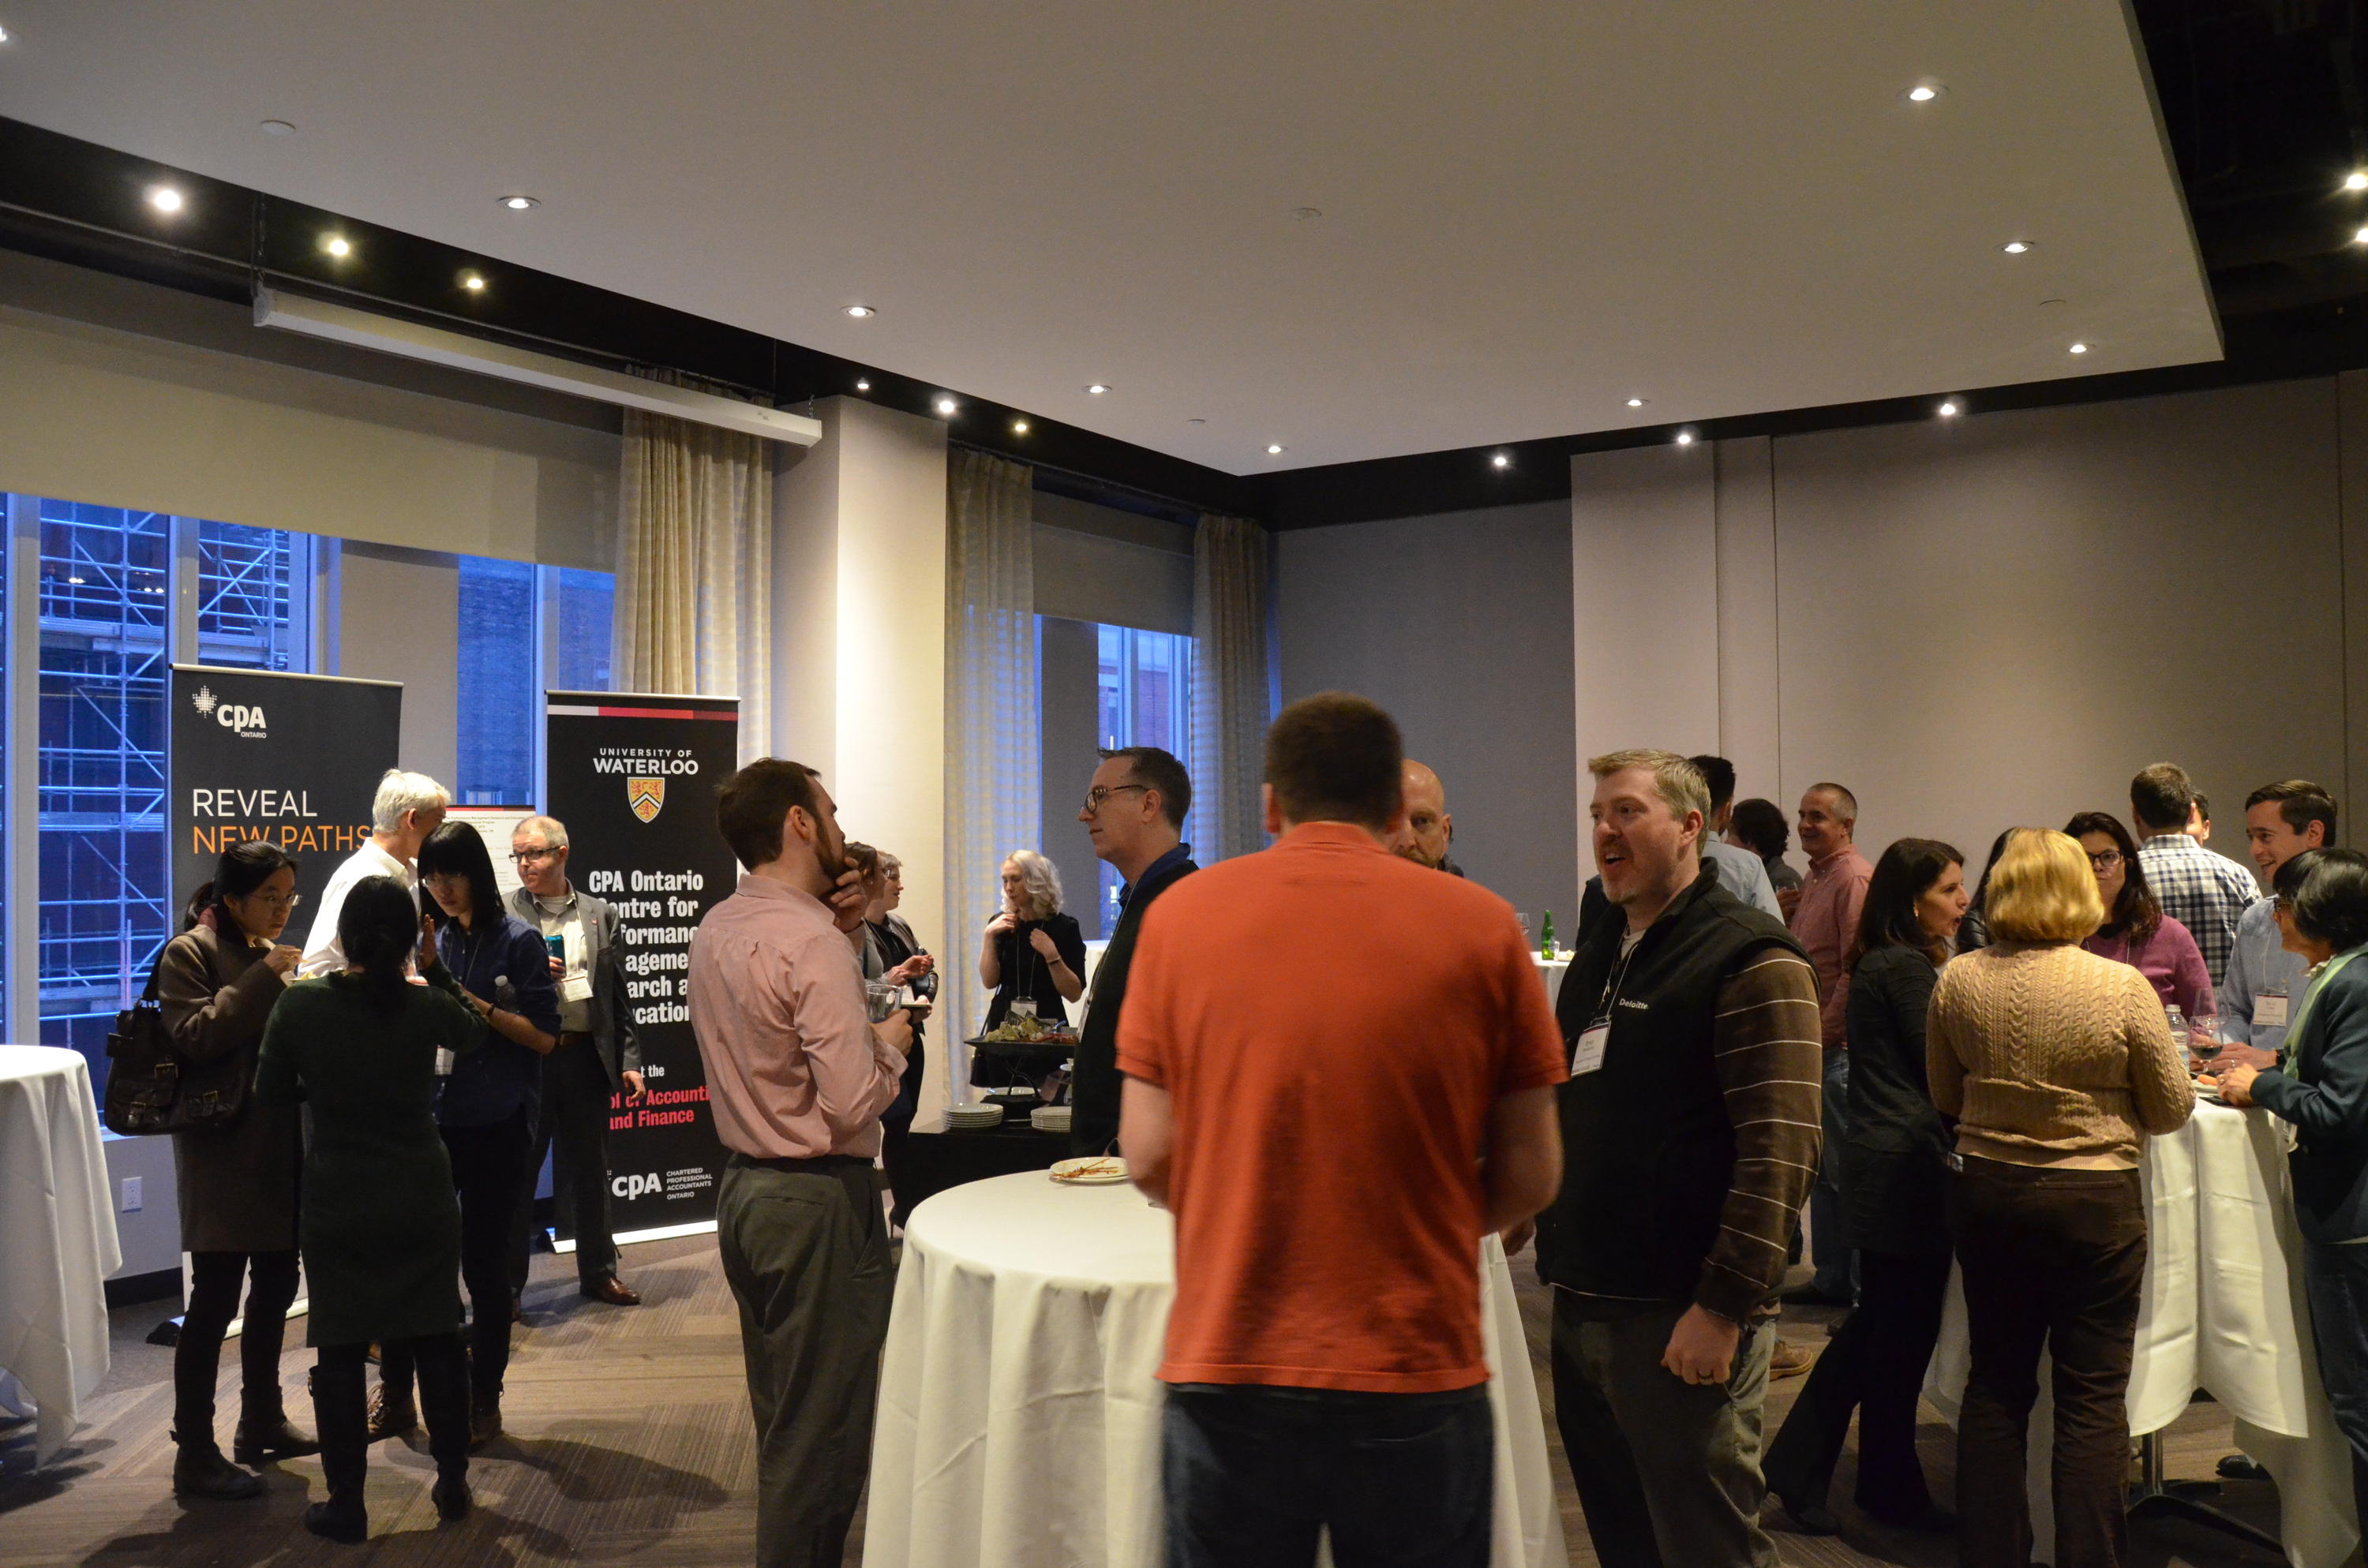 Attendees networking during evening reception